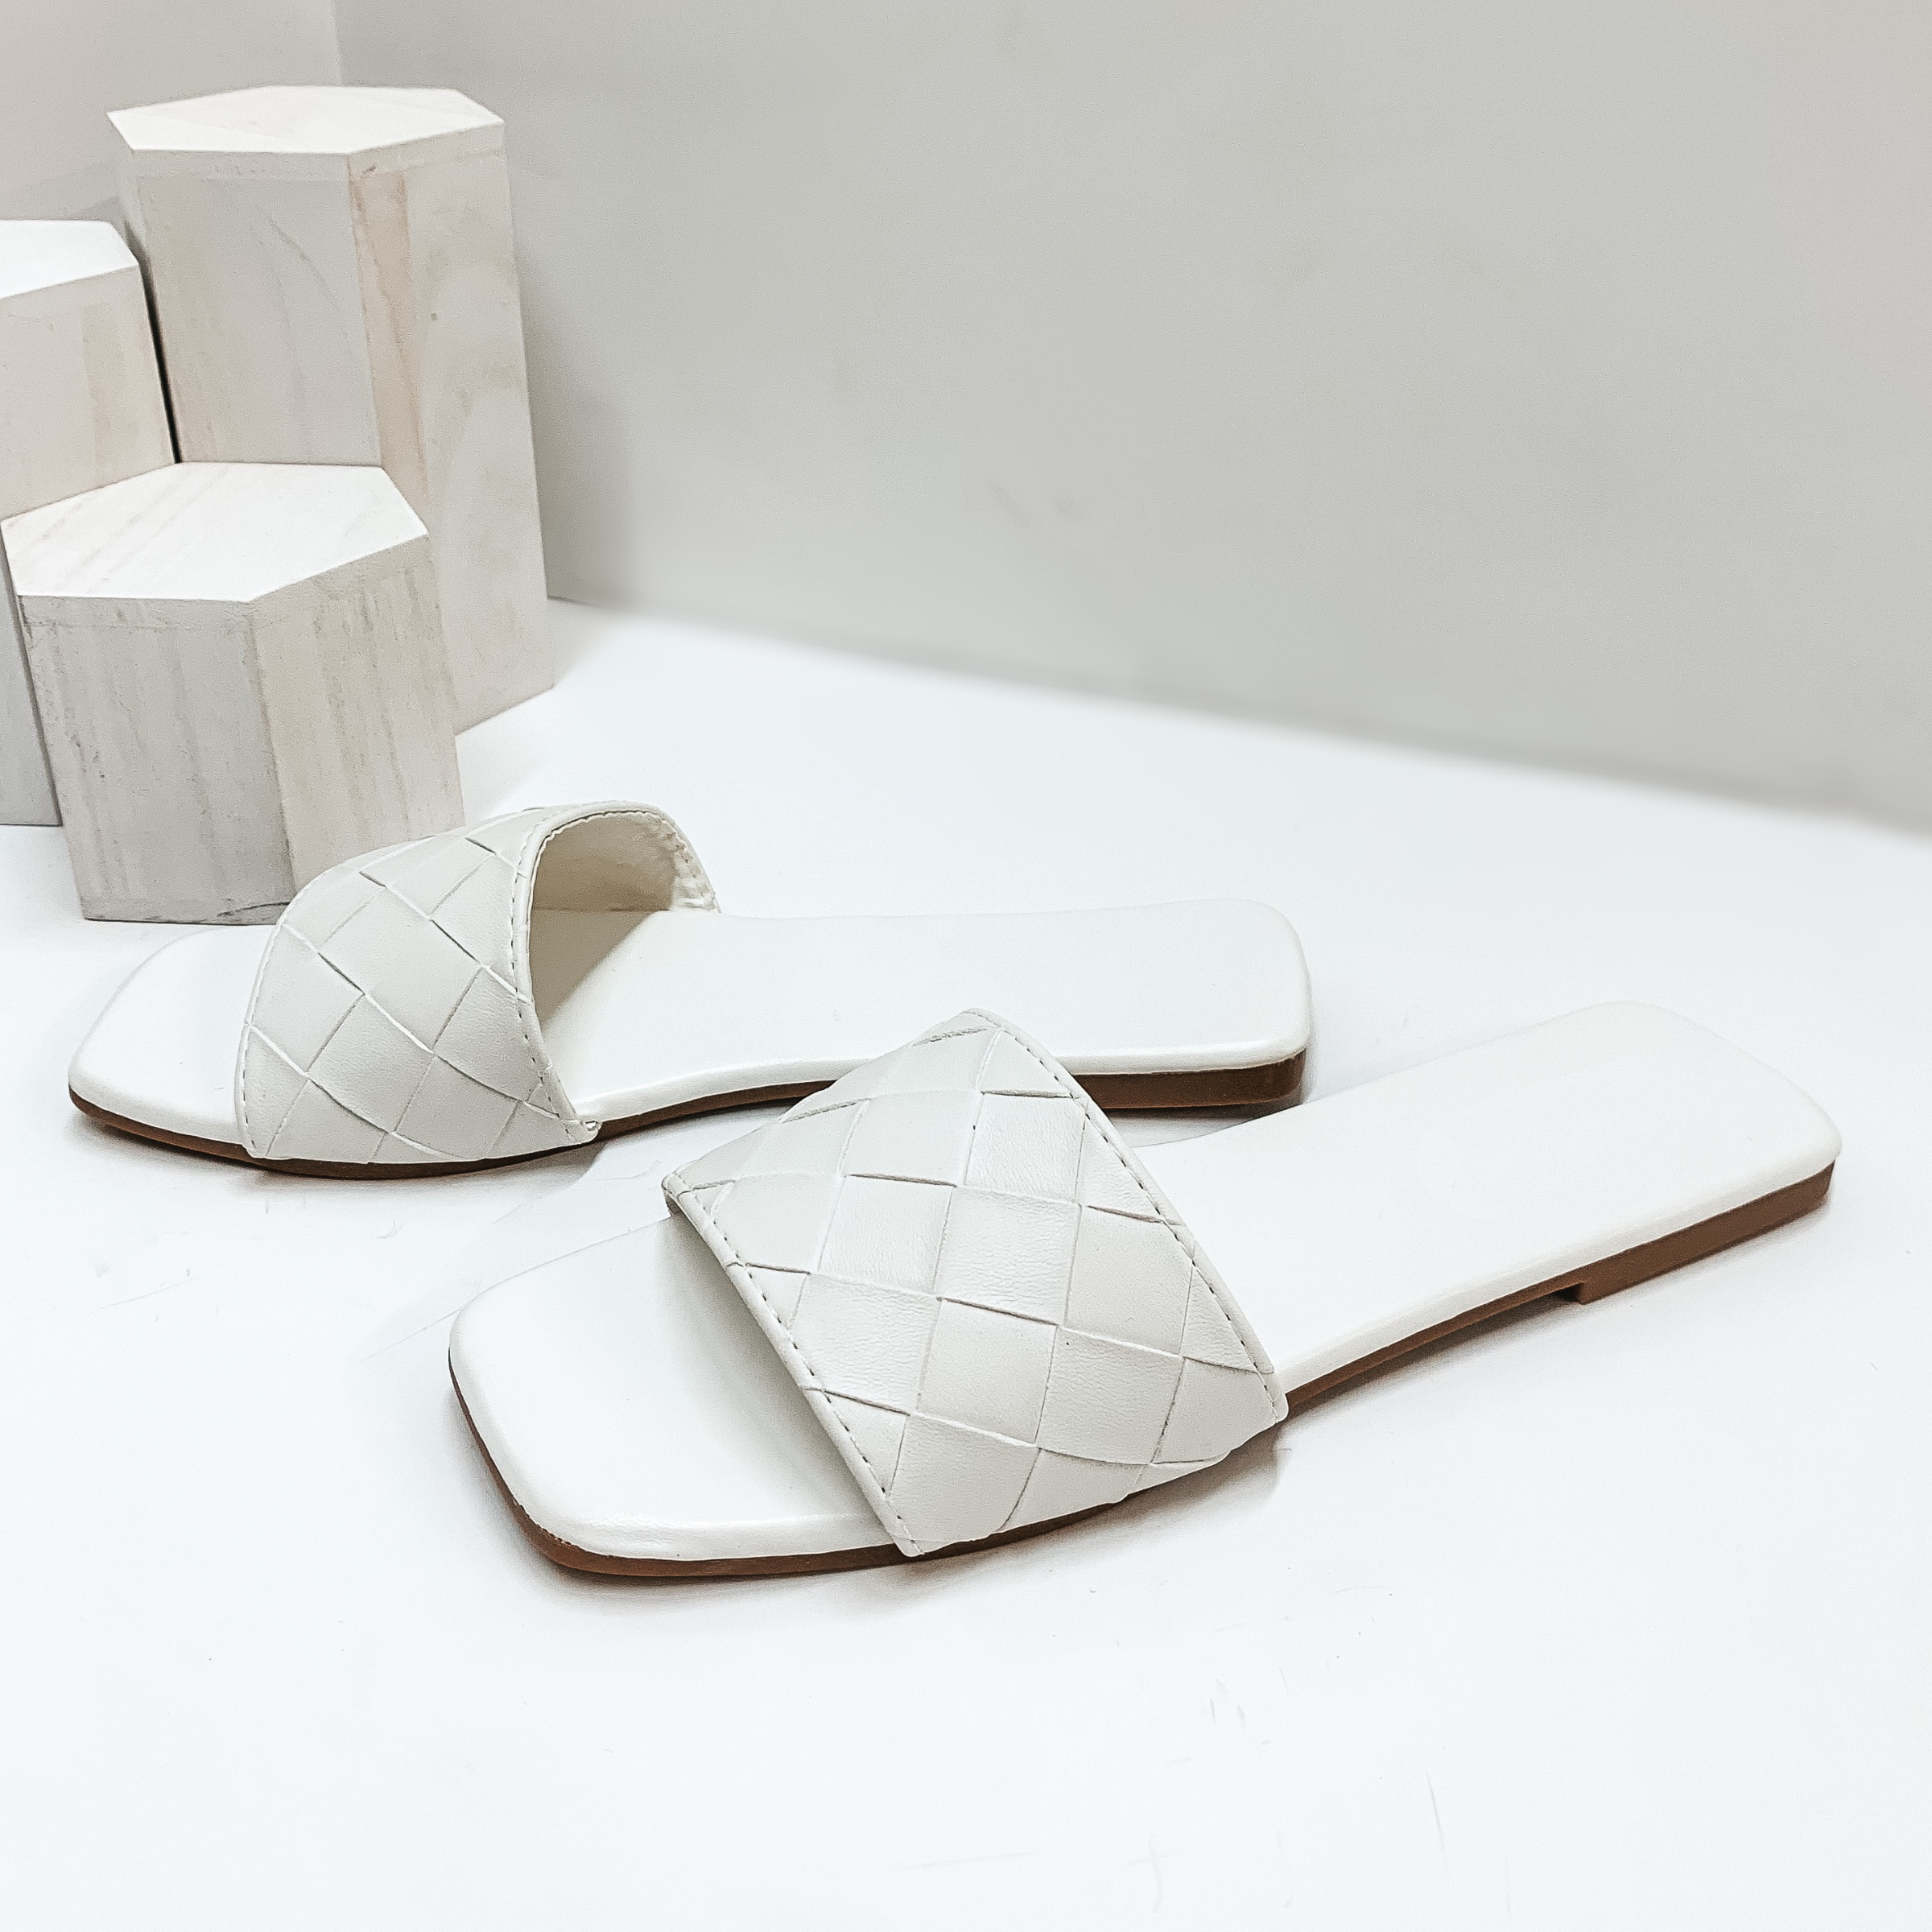 Always Looking Up Basket Weave One Strap Slide On Sandals in White - Giddy Up Glamour Boutique